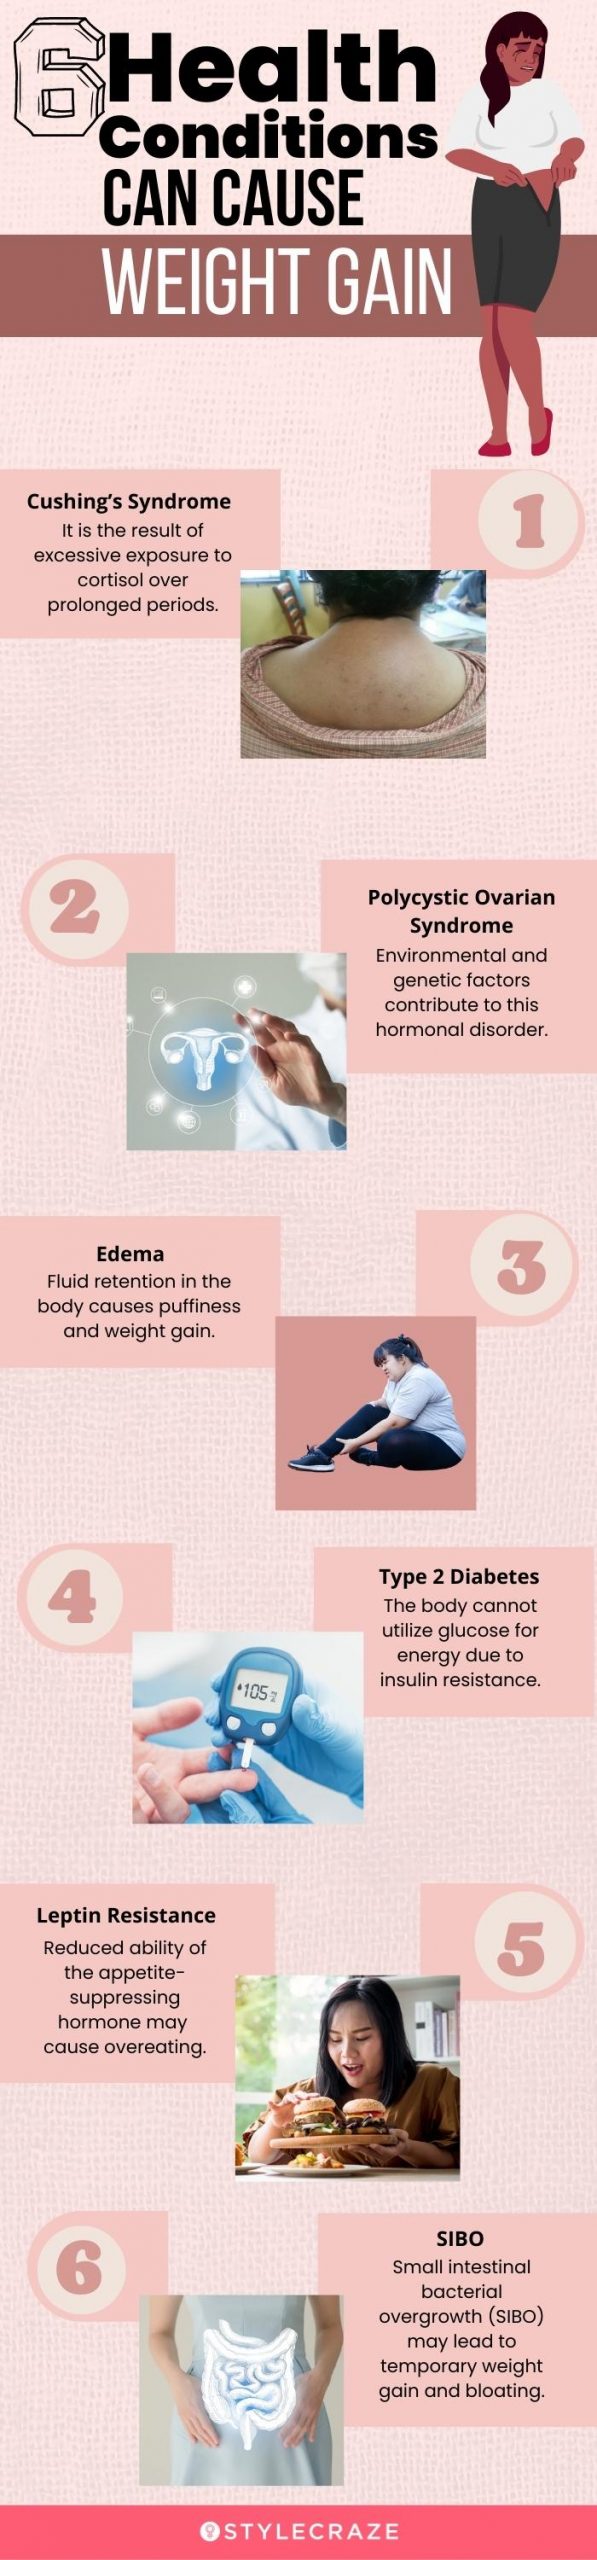 6 health conditions can cause weight gain [infographic]